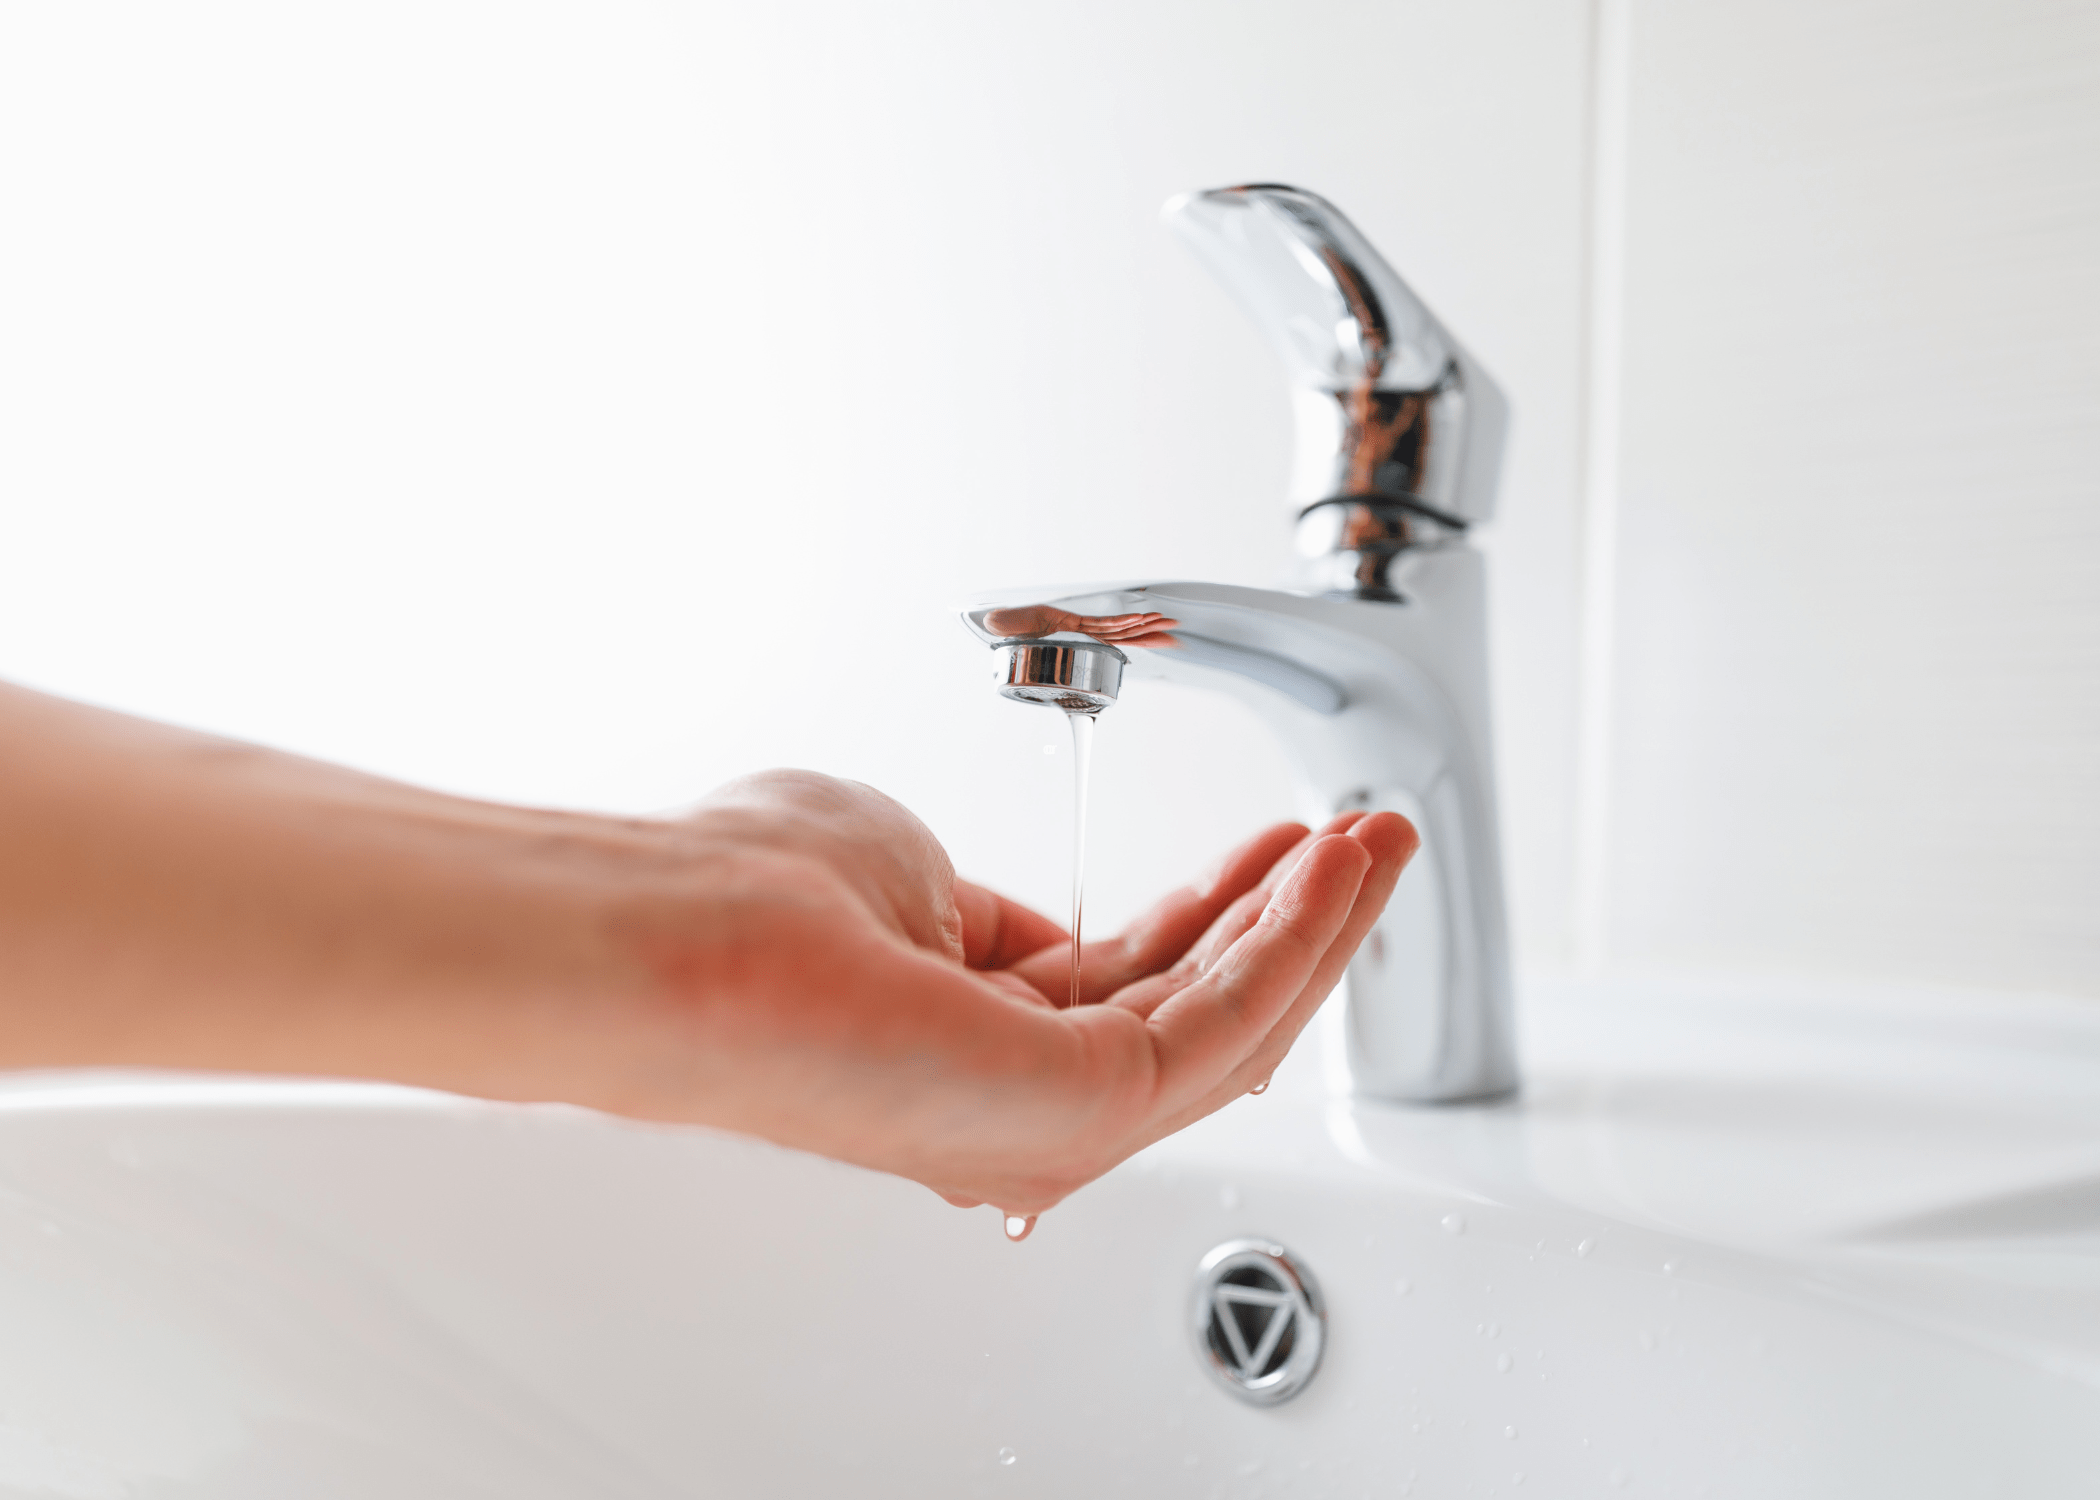 How to improve water pressure in your home